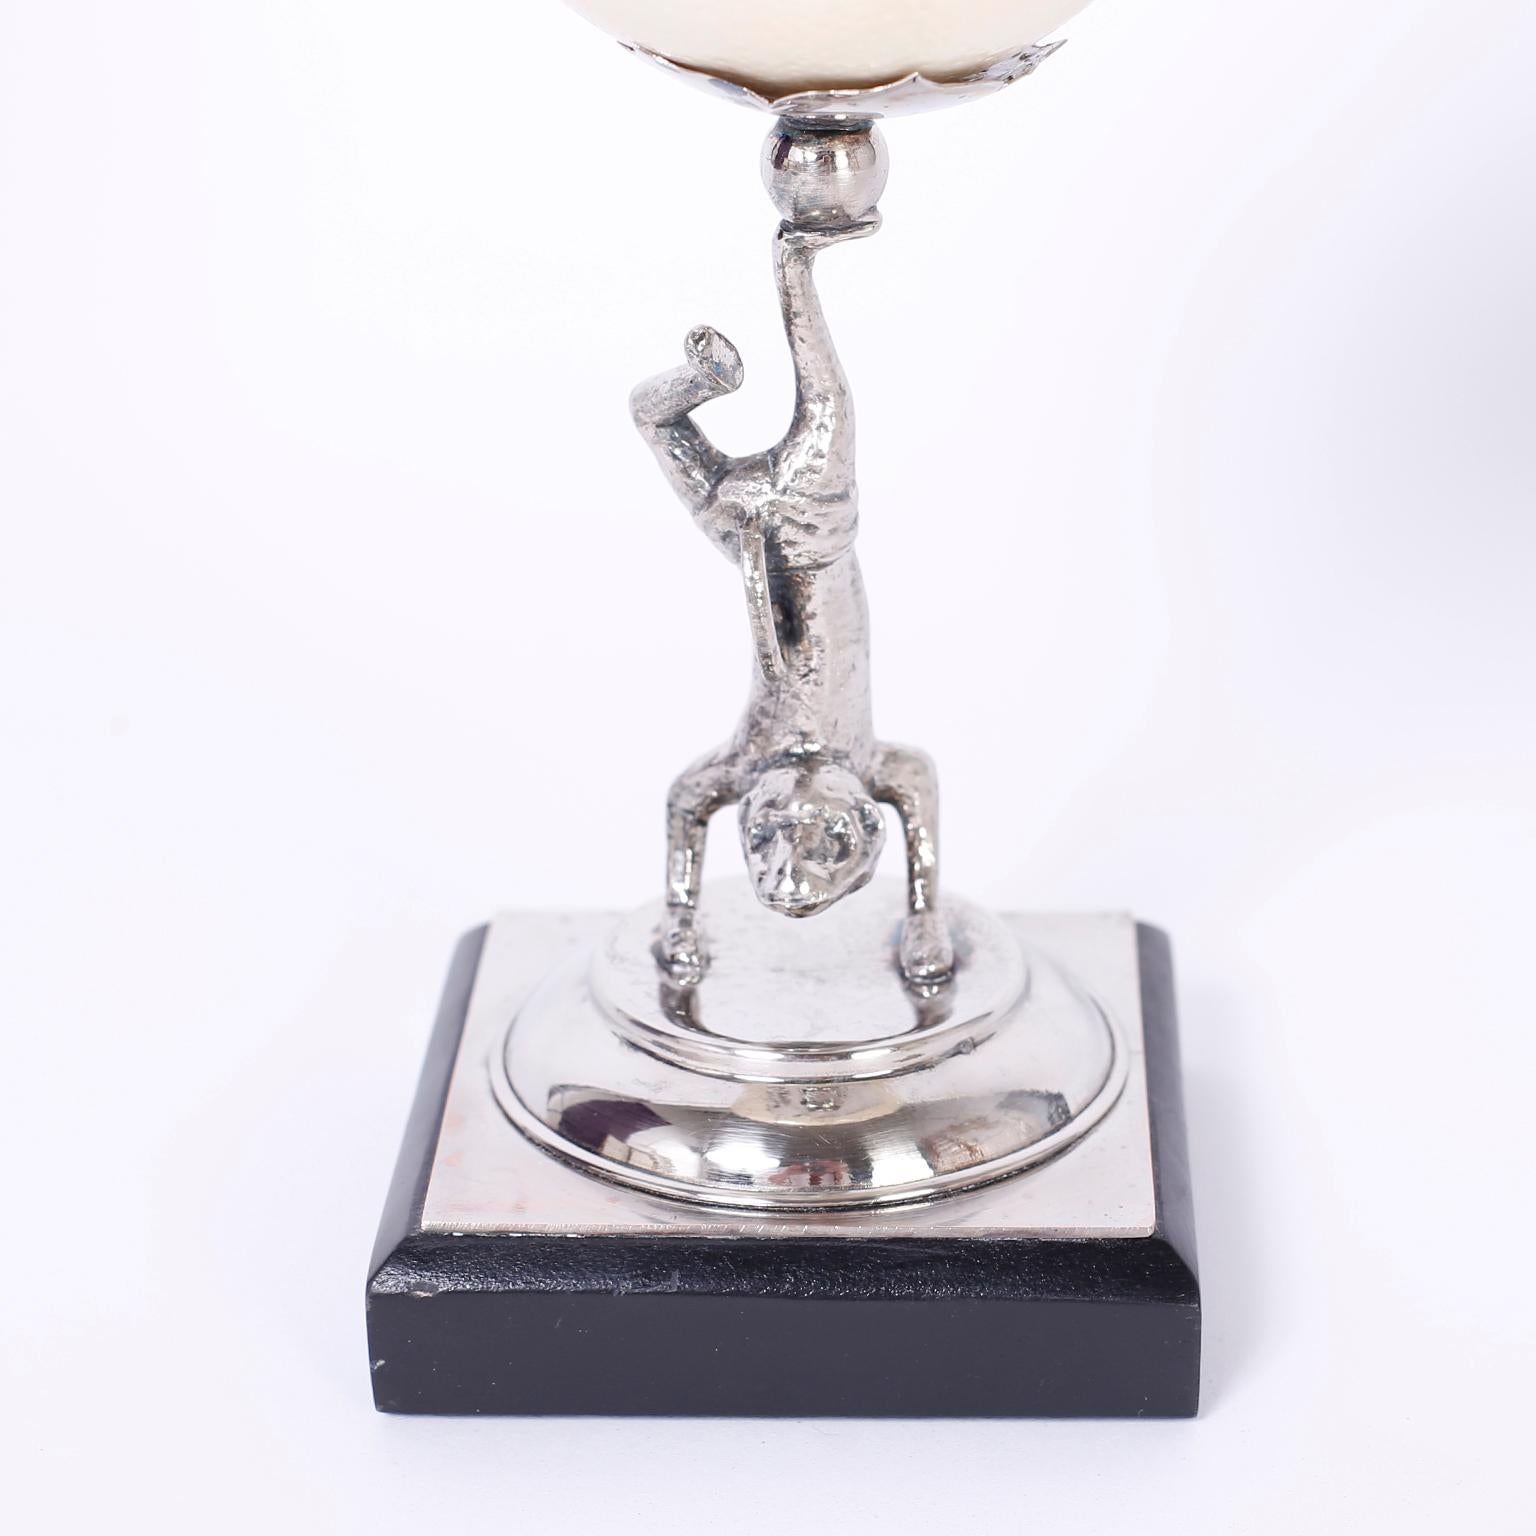 Pair of Figura Lizardl Ostrich Egg Candlesticks by Redmile In Good Condition For Sale In Palm Beach, FL